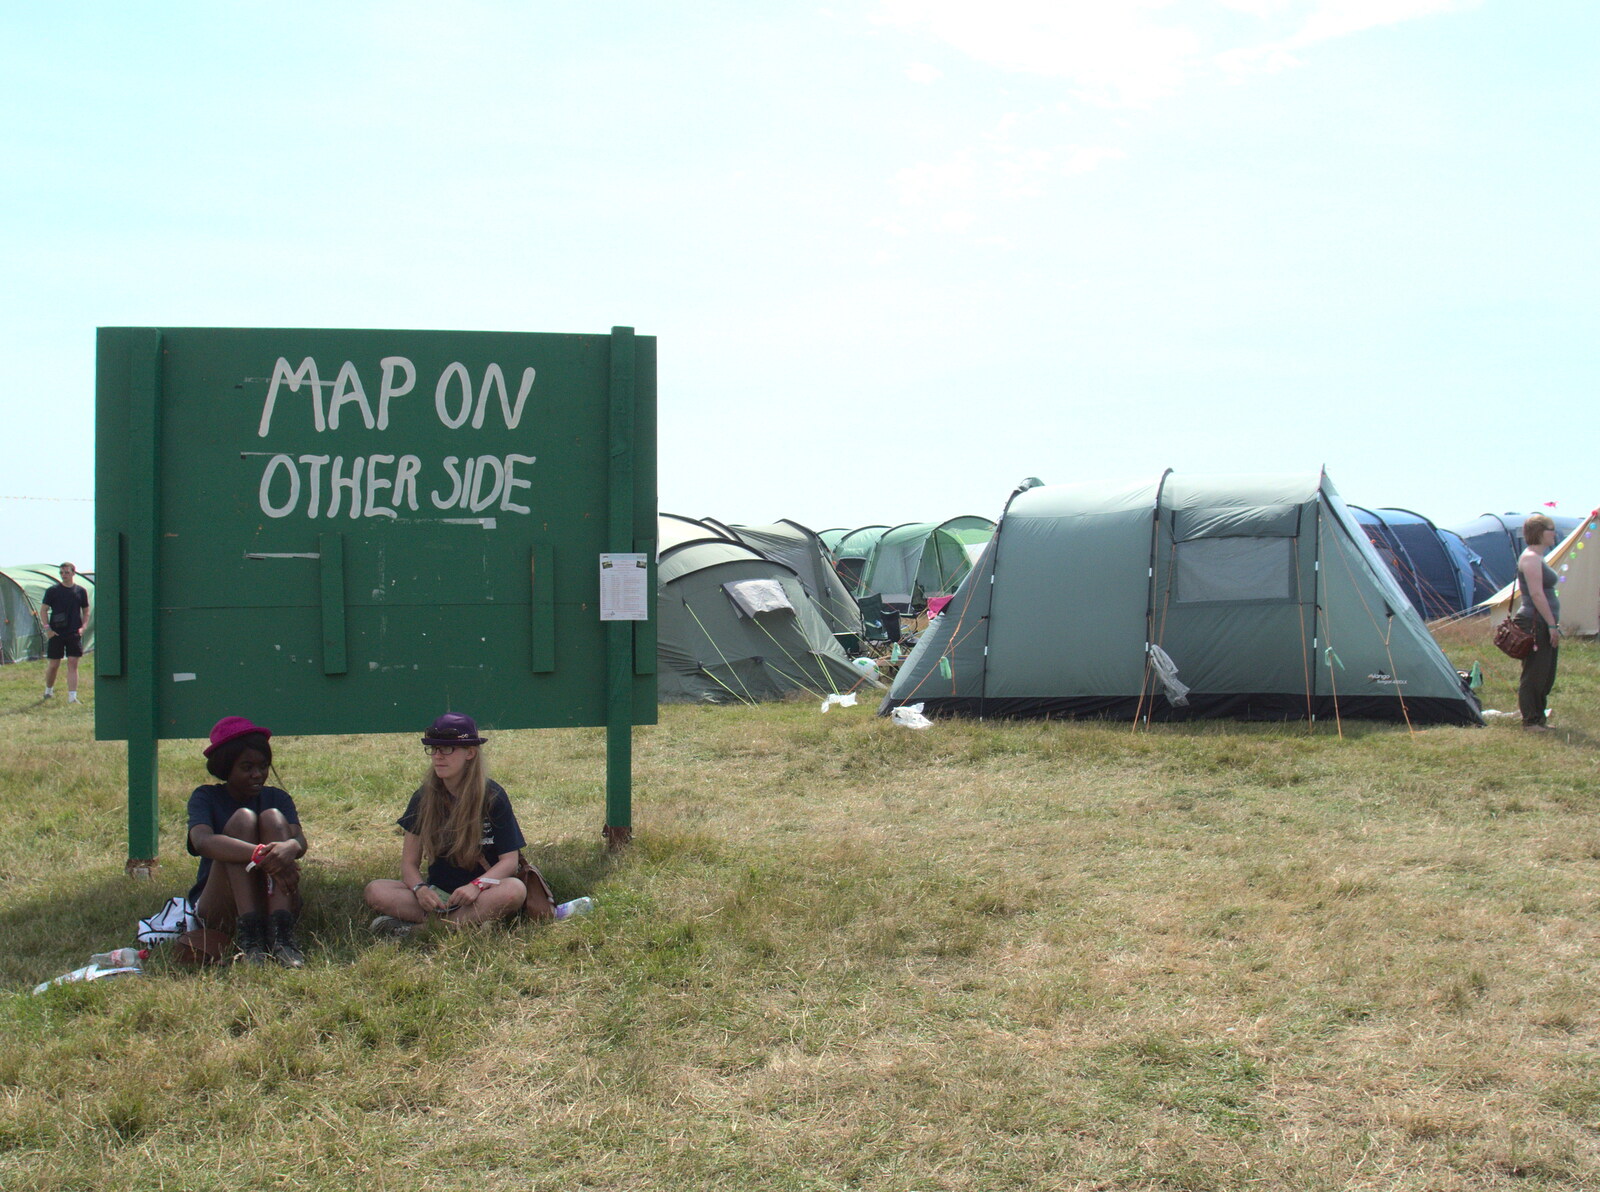 The useful 'Map onother side' sign from Latitude Festival, Henham Park, Southwold, Suffolk - 17th July 2014